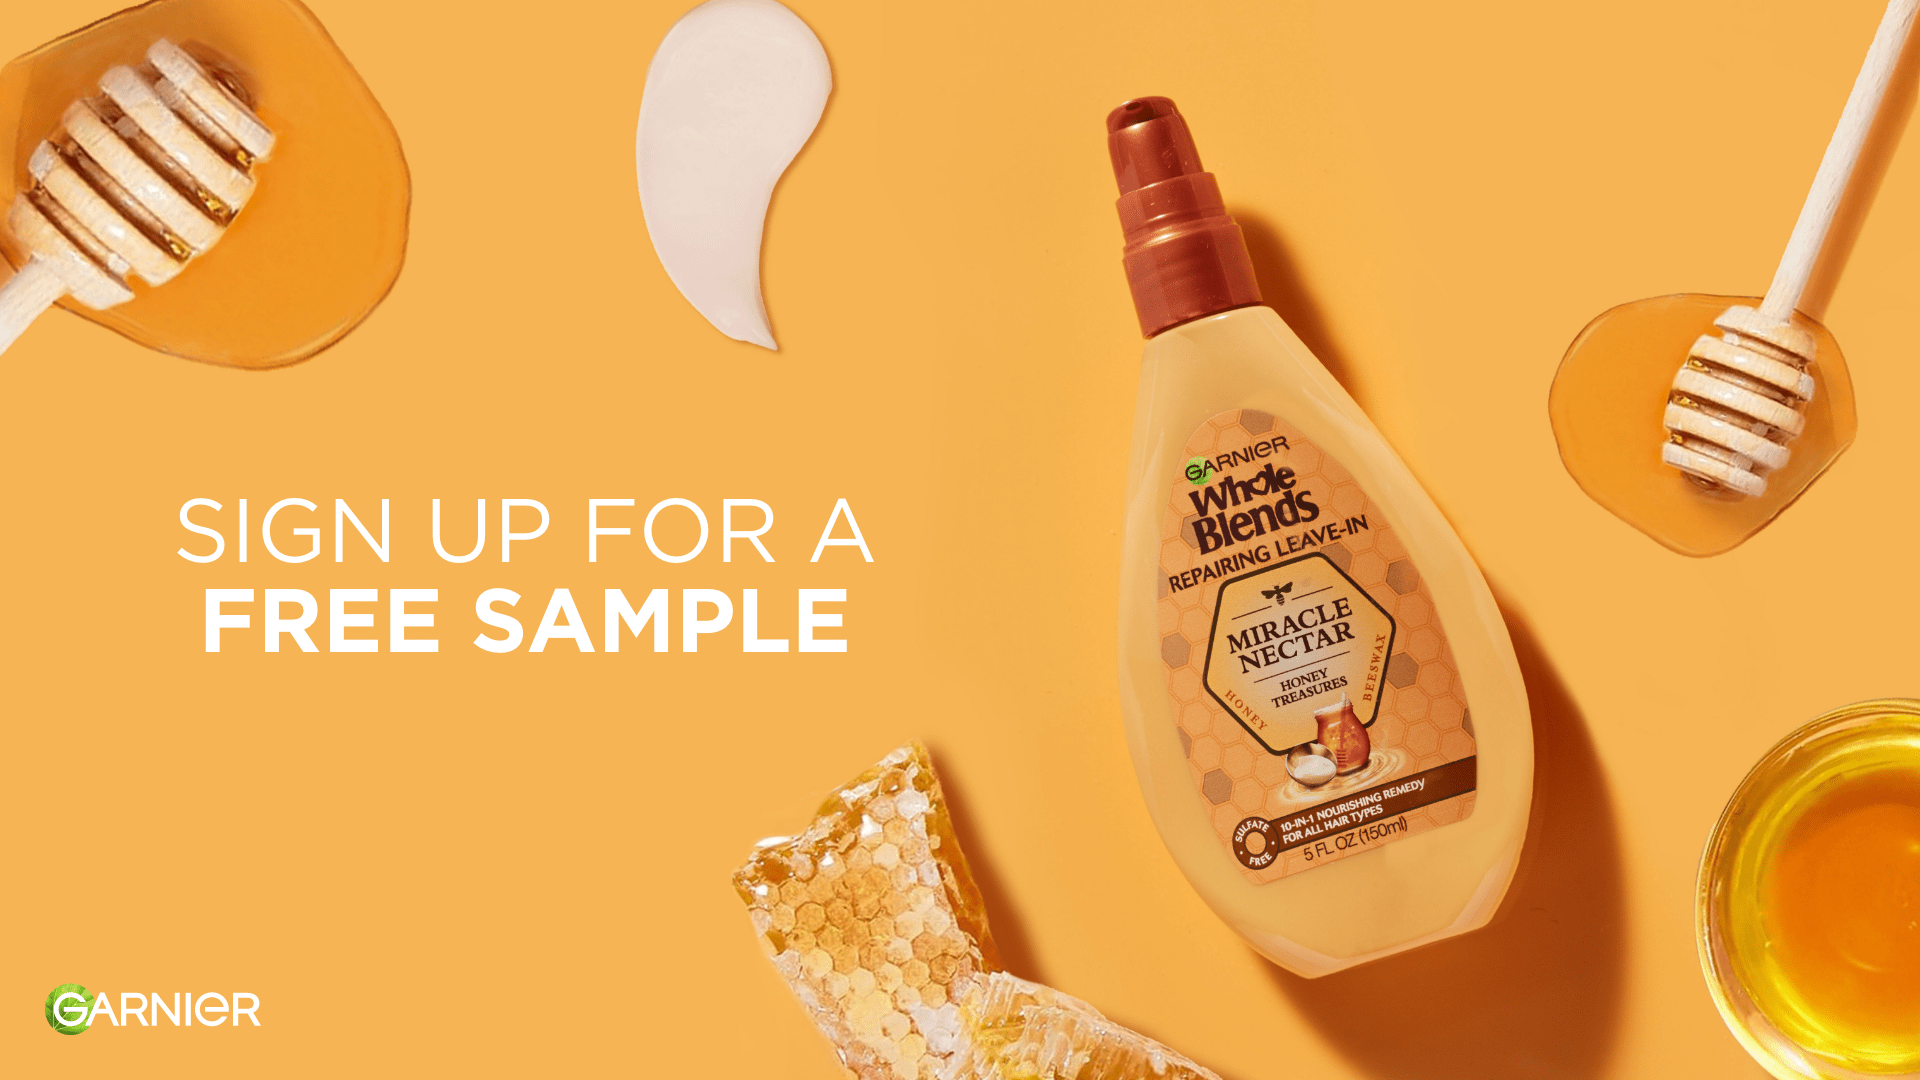 Free Whole Blends Miracle Nectar Leave-In Sample